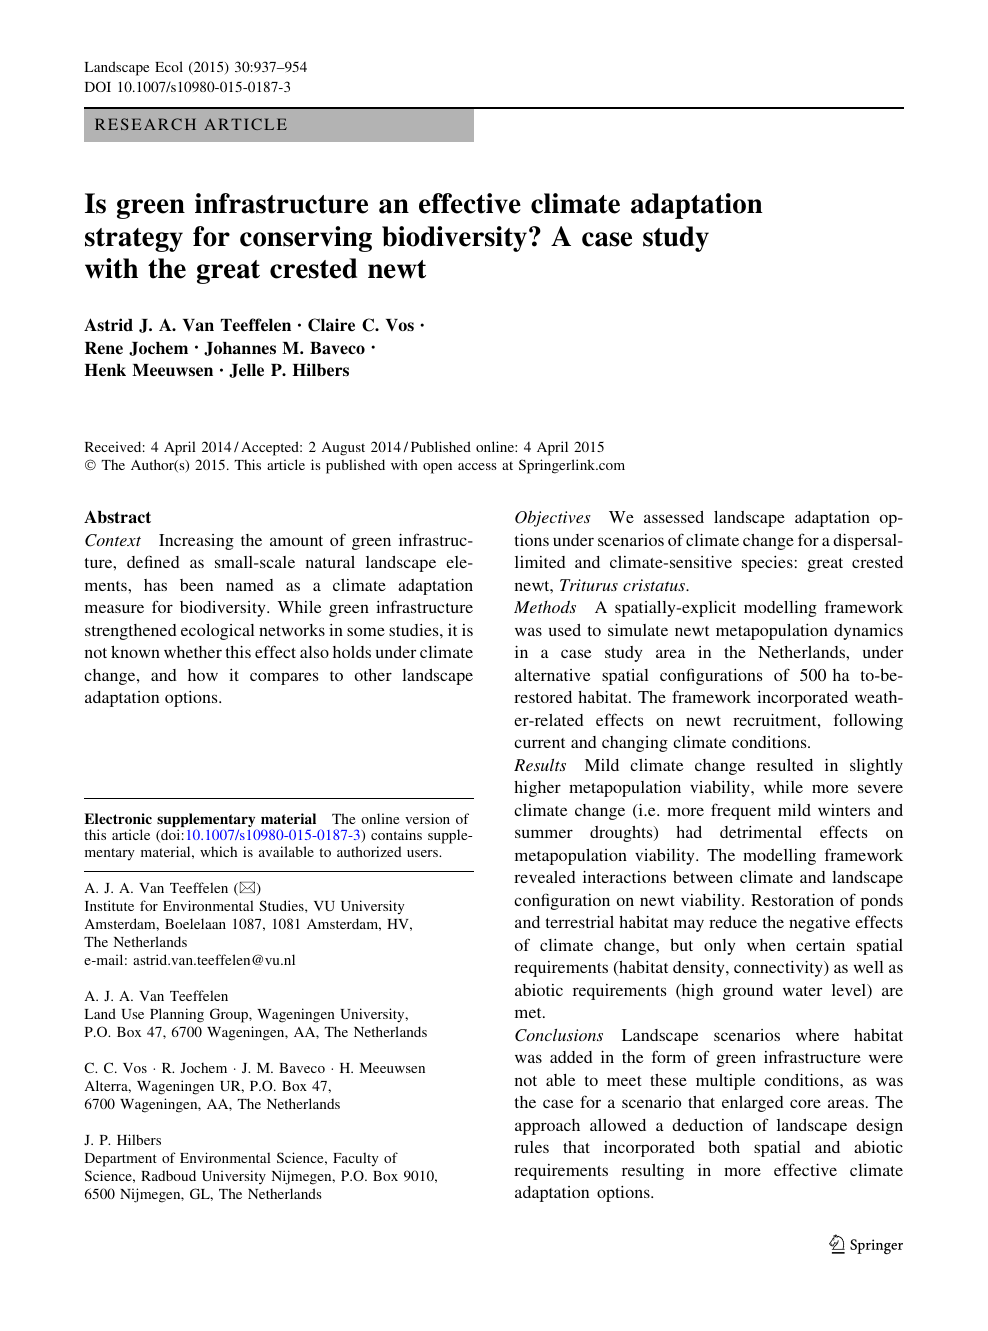 Is Green Infrastructure An Effective Climate Adaptation Strategy For Conserving Biodiversity A Case Study With The Great Crested Newt Topic Of Research Paper In Earth And Related Environmental Sciences Download Scholarly